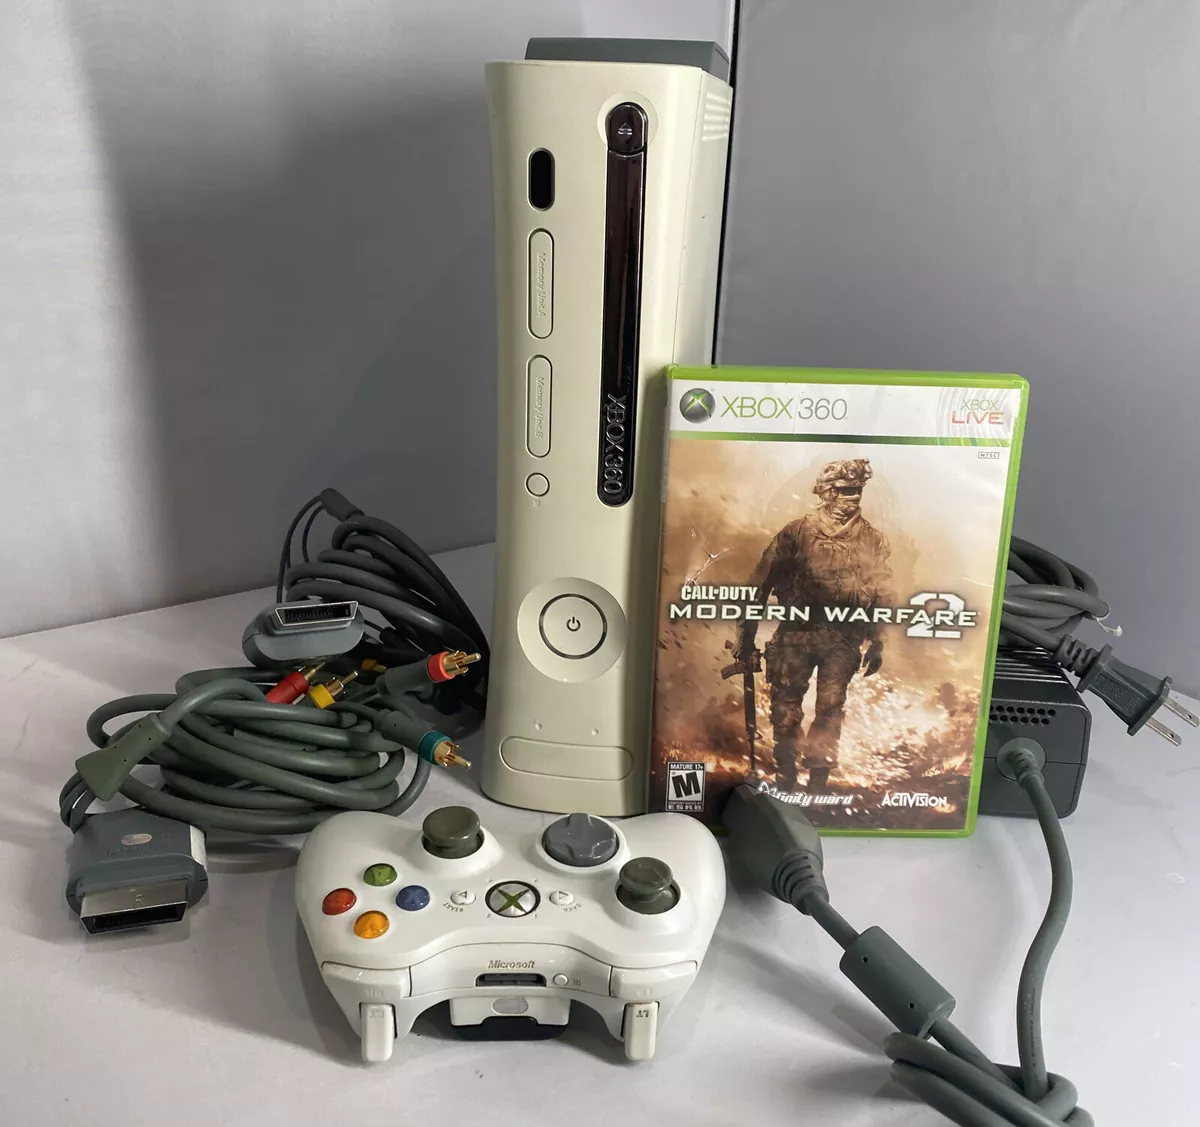 Xbox 360 Core Console Video Game System